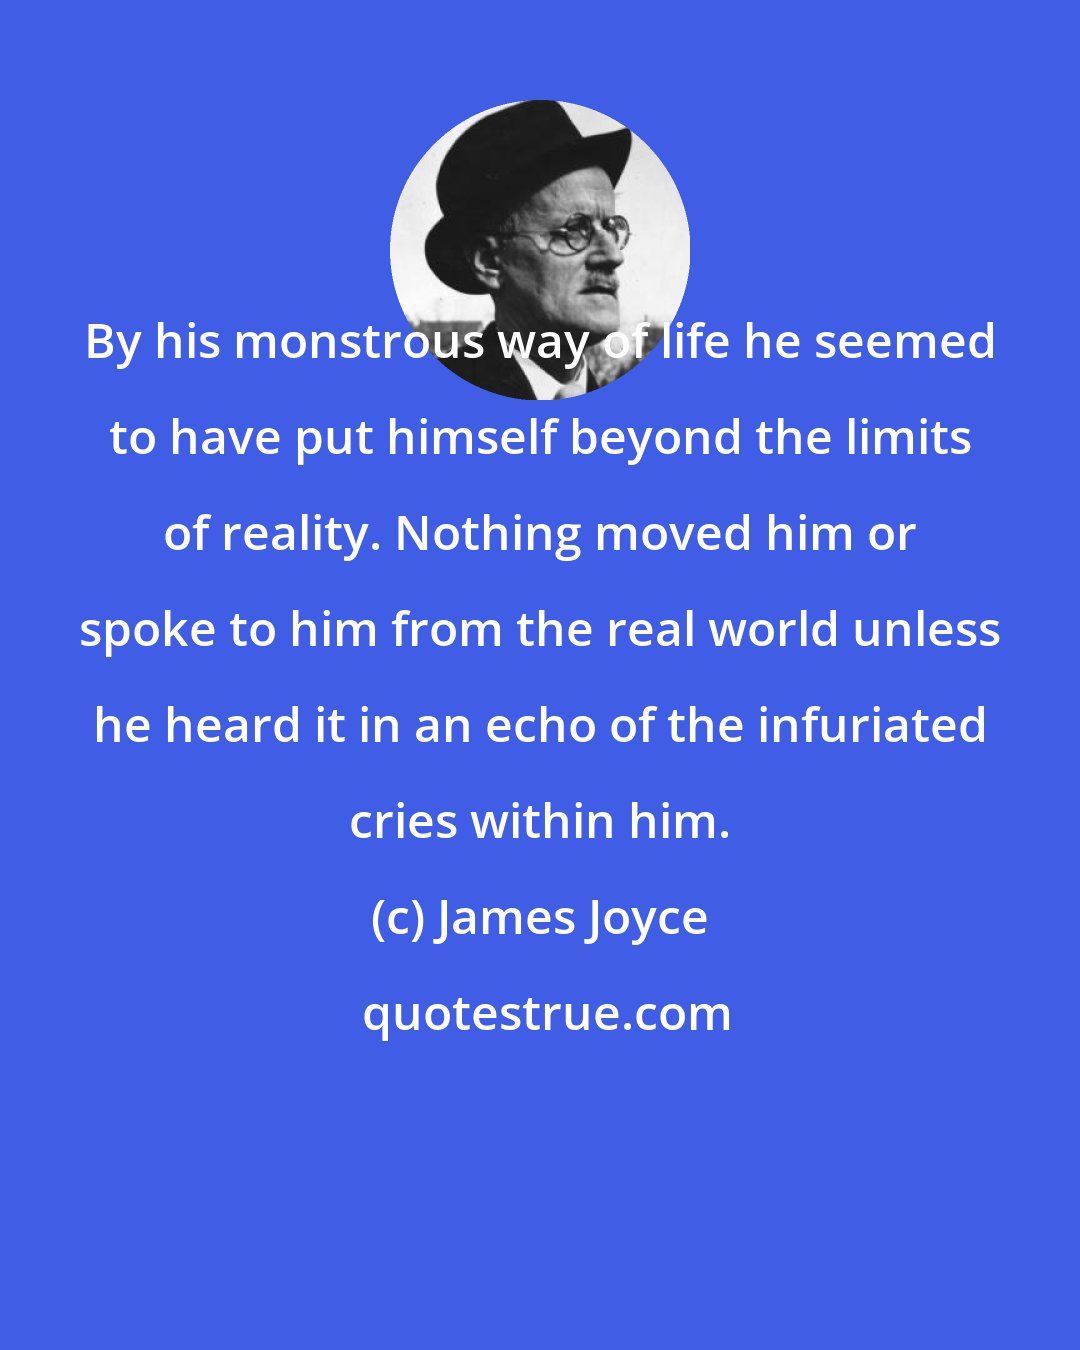 James Joyce: By his monstrous way of life he seemed to have put himself beyond the limits of reality. Nothing moved him or spoke to him from the real world unless he heard it in an echo of the infuriated cries within him.